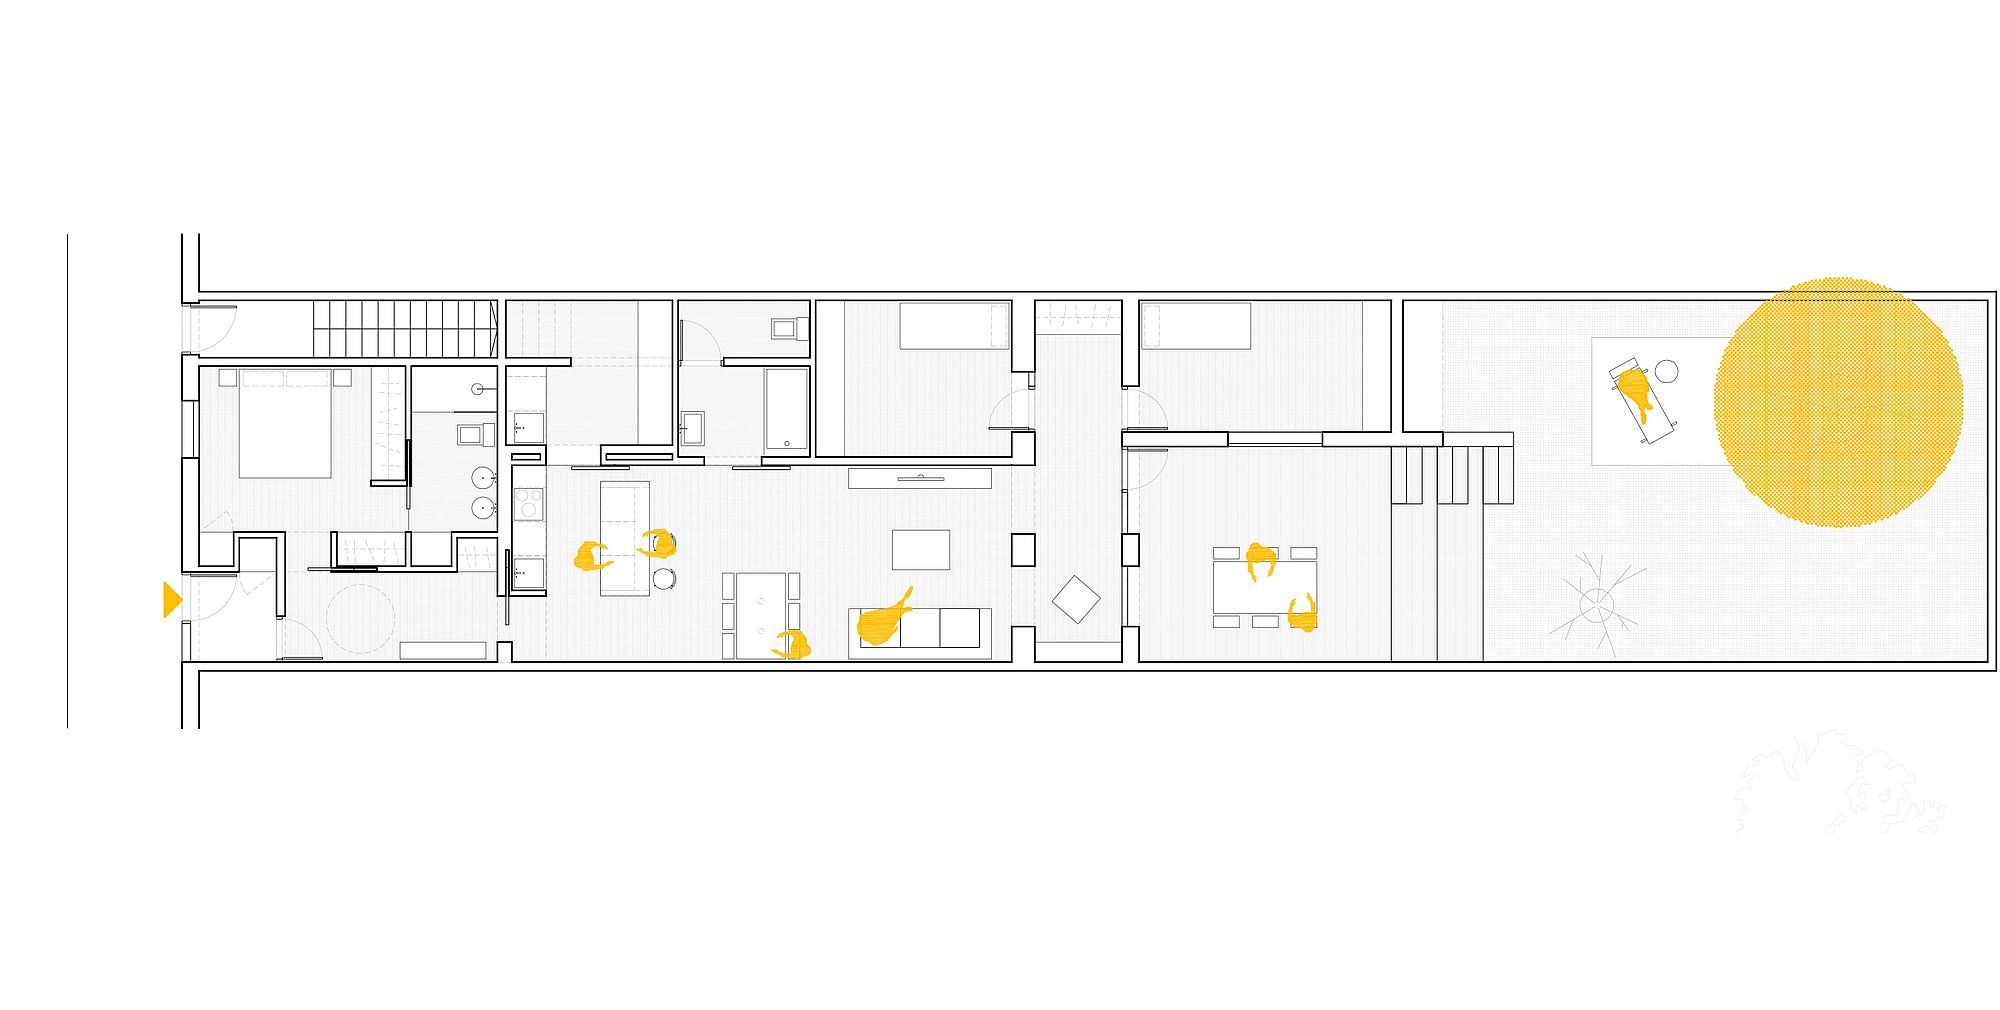 Floor plan of Refurbishment in Sarrià designed by Sergi Pons architects